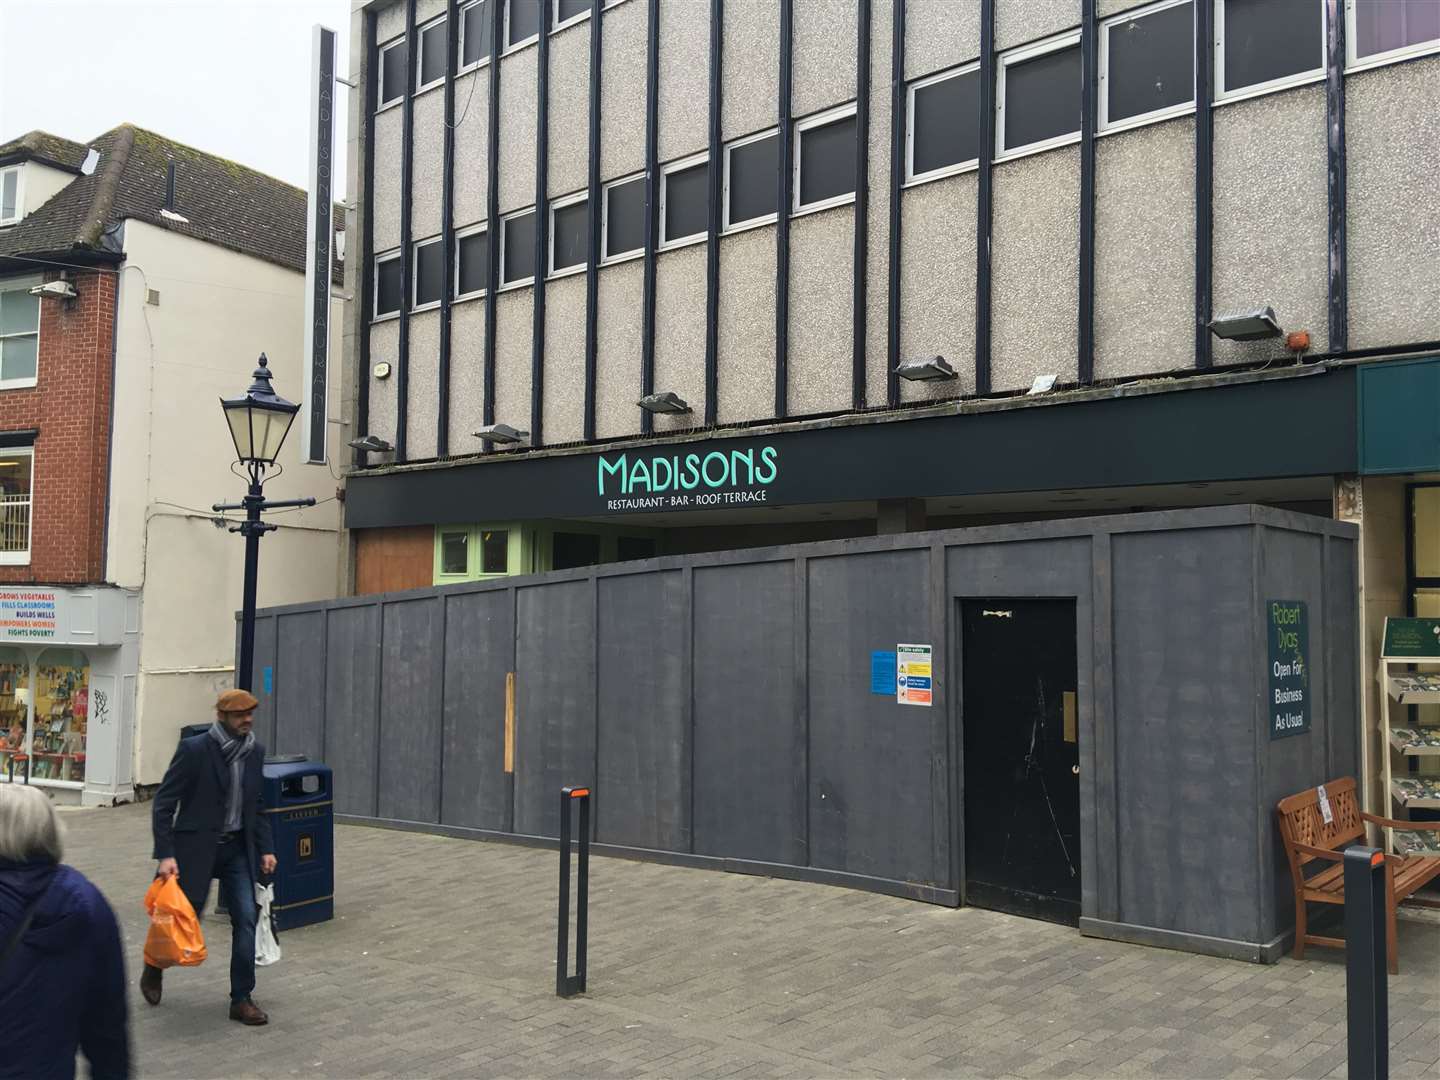 Branding has gone up for Madisons restaurant, formerly home to Strawberry Moons nightclub in Maidstone